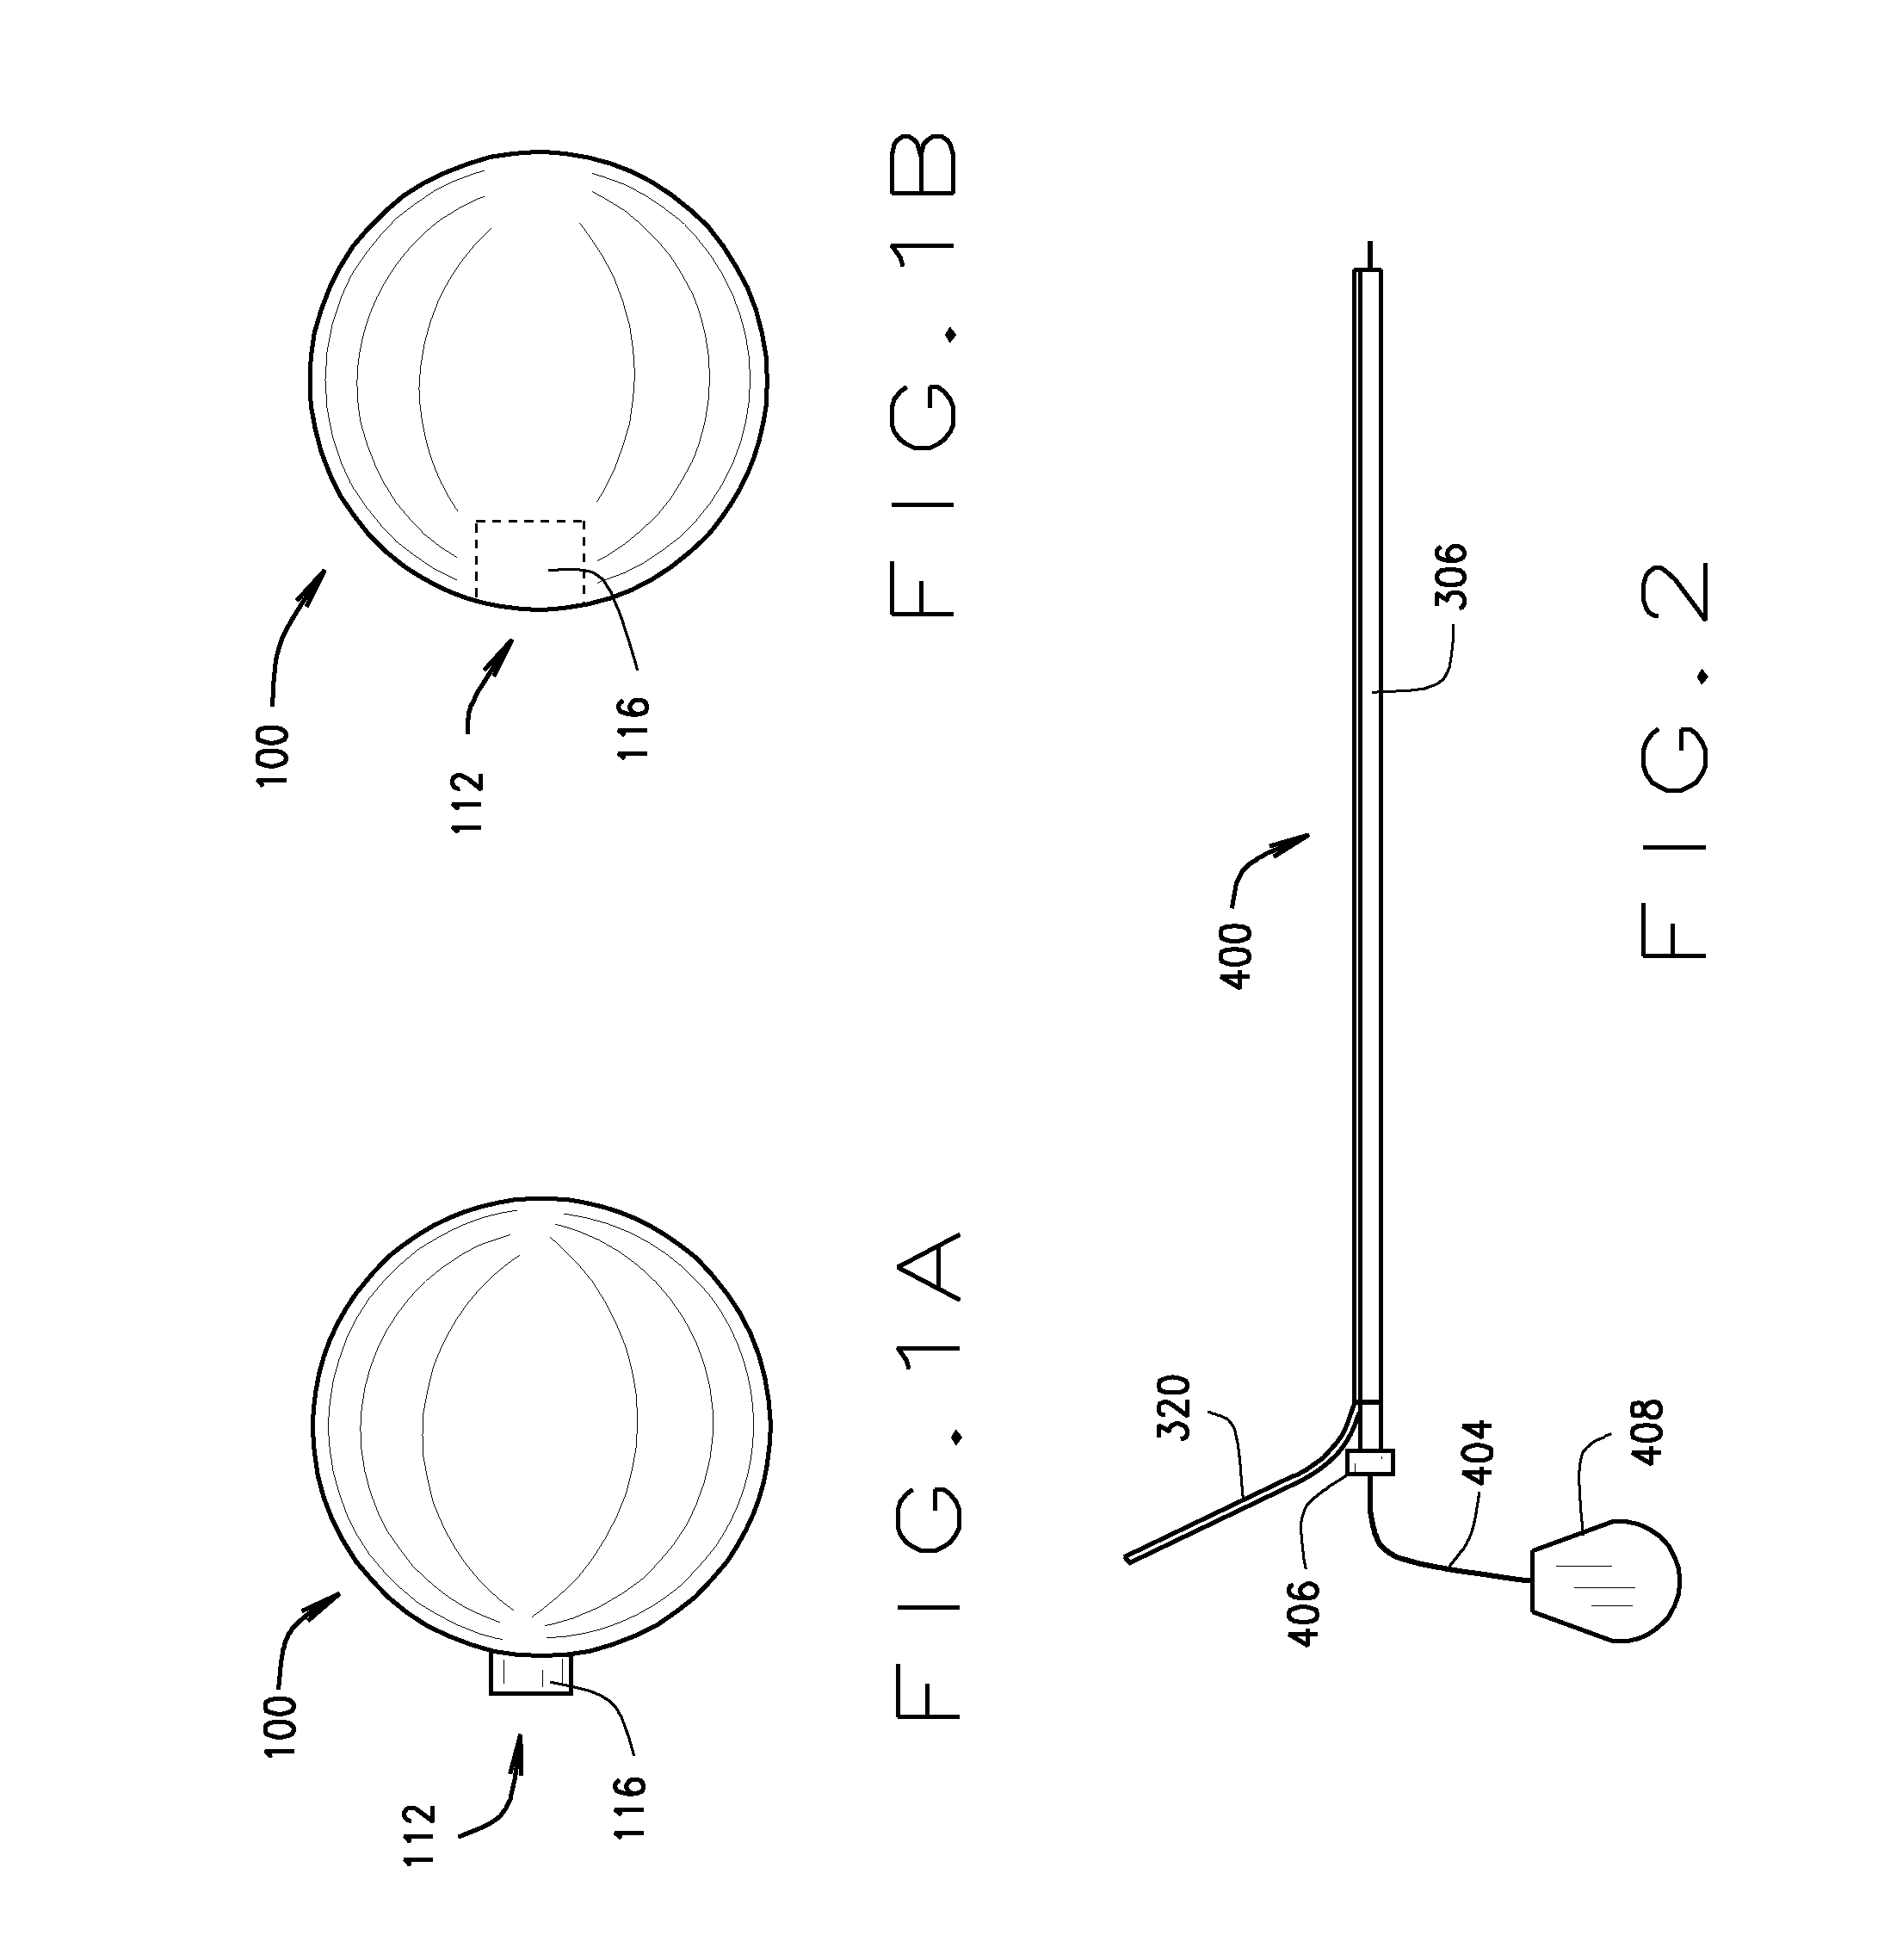 Ballstent device and methods of use